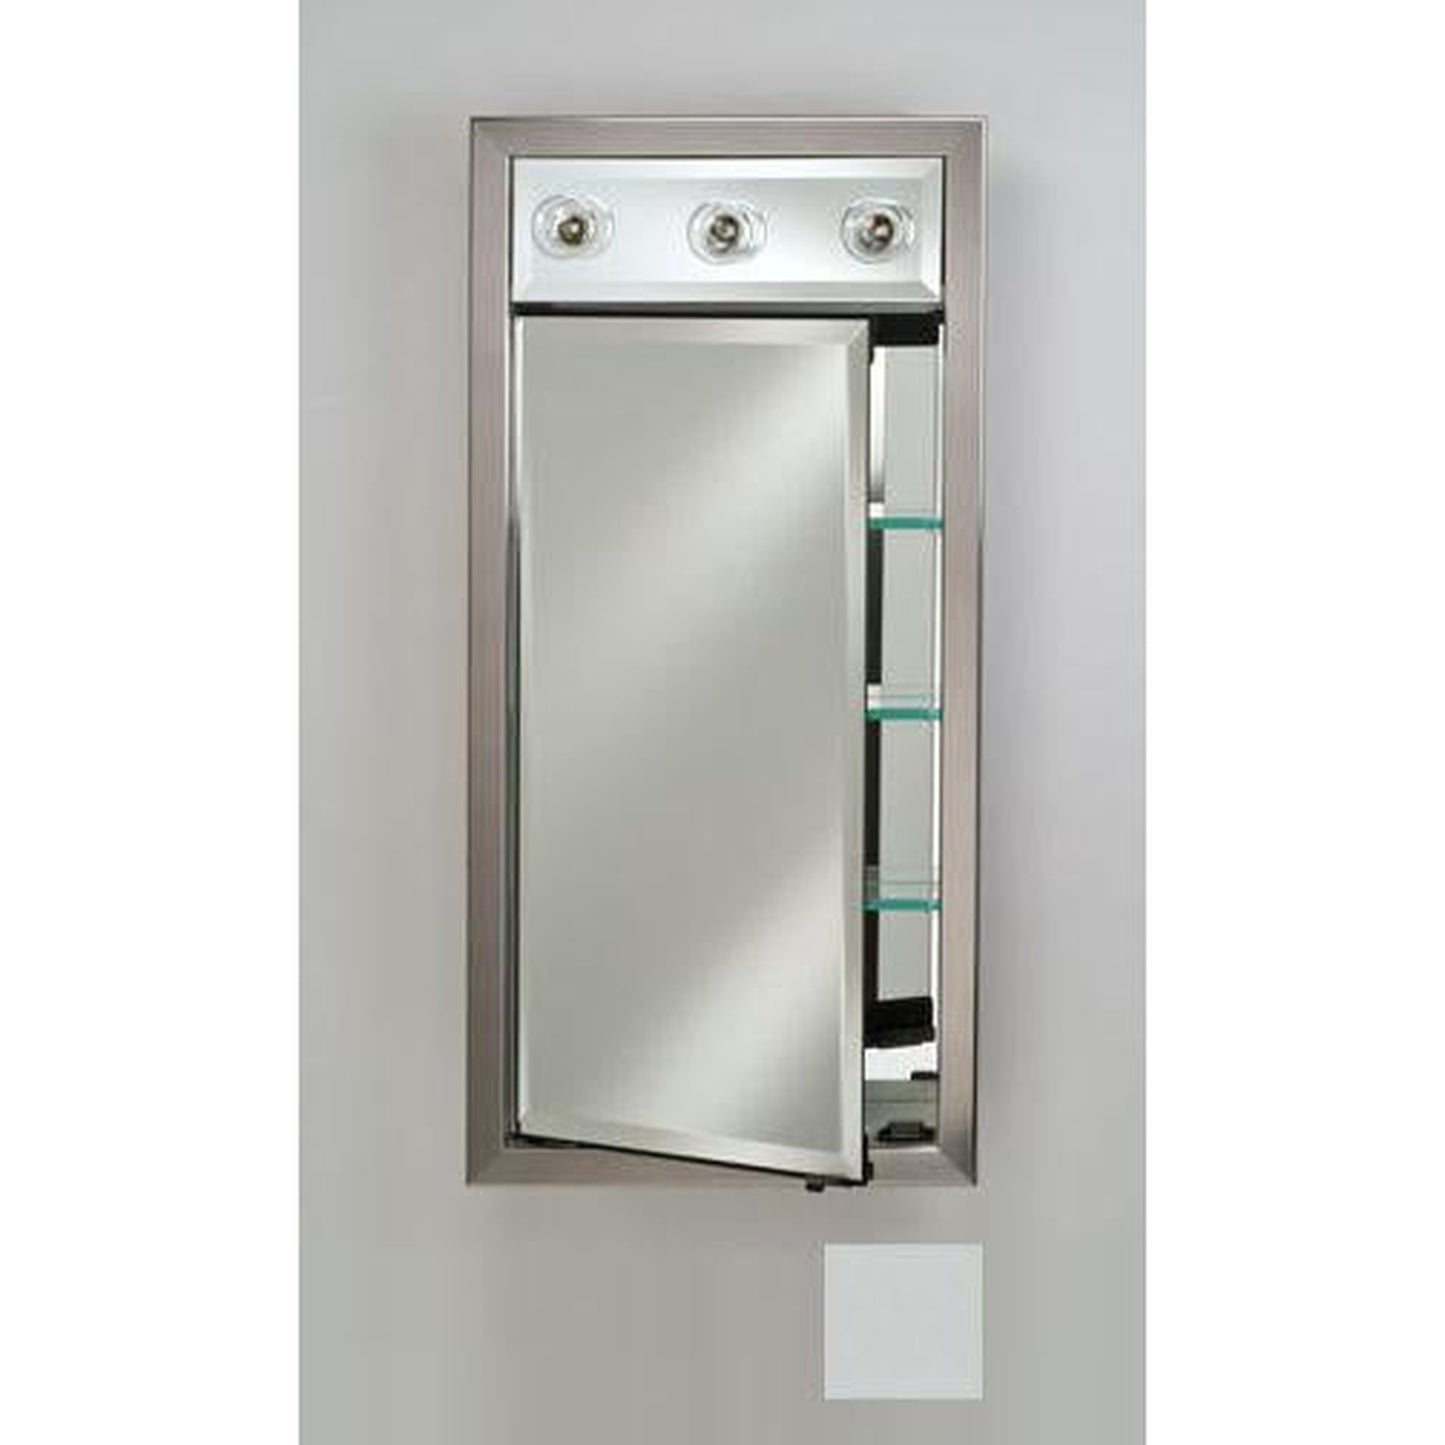 Afina Signature 17" x 34" Soho Satin White Recessed Left Hinged Single Door Medicine Cabinet With Contemporary Lights